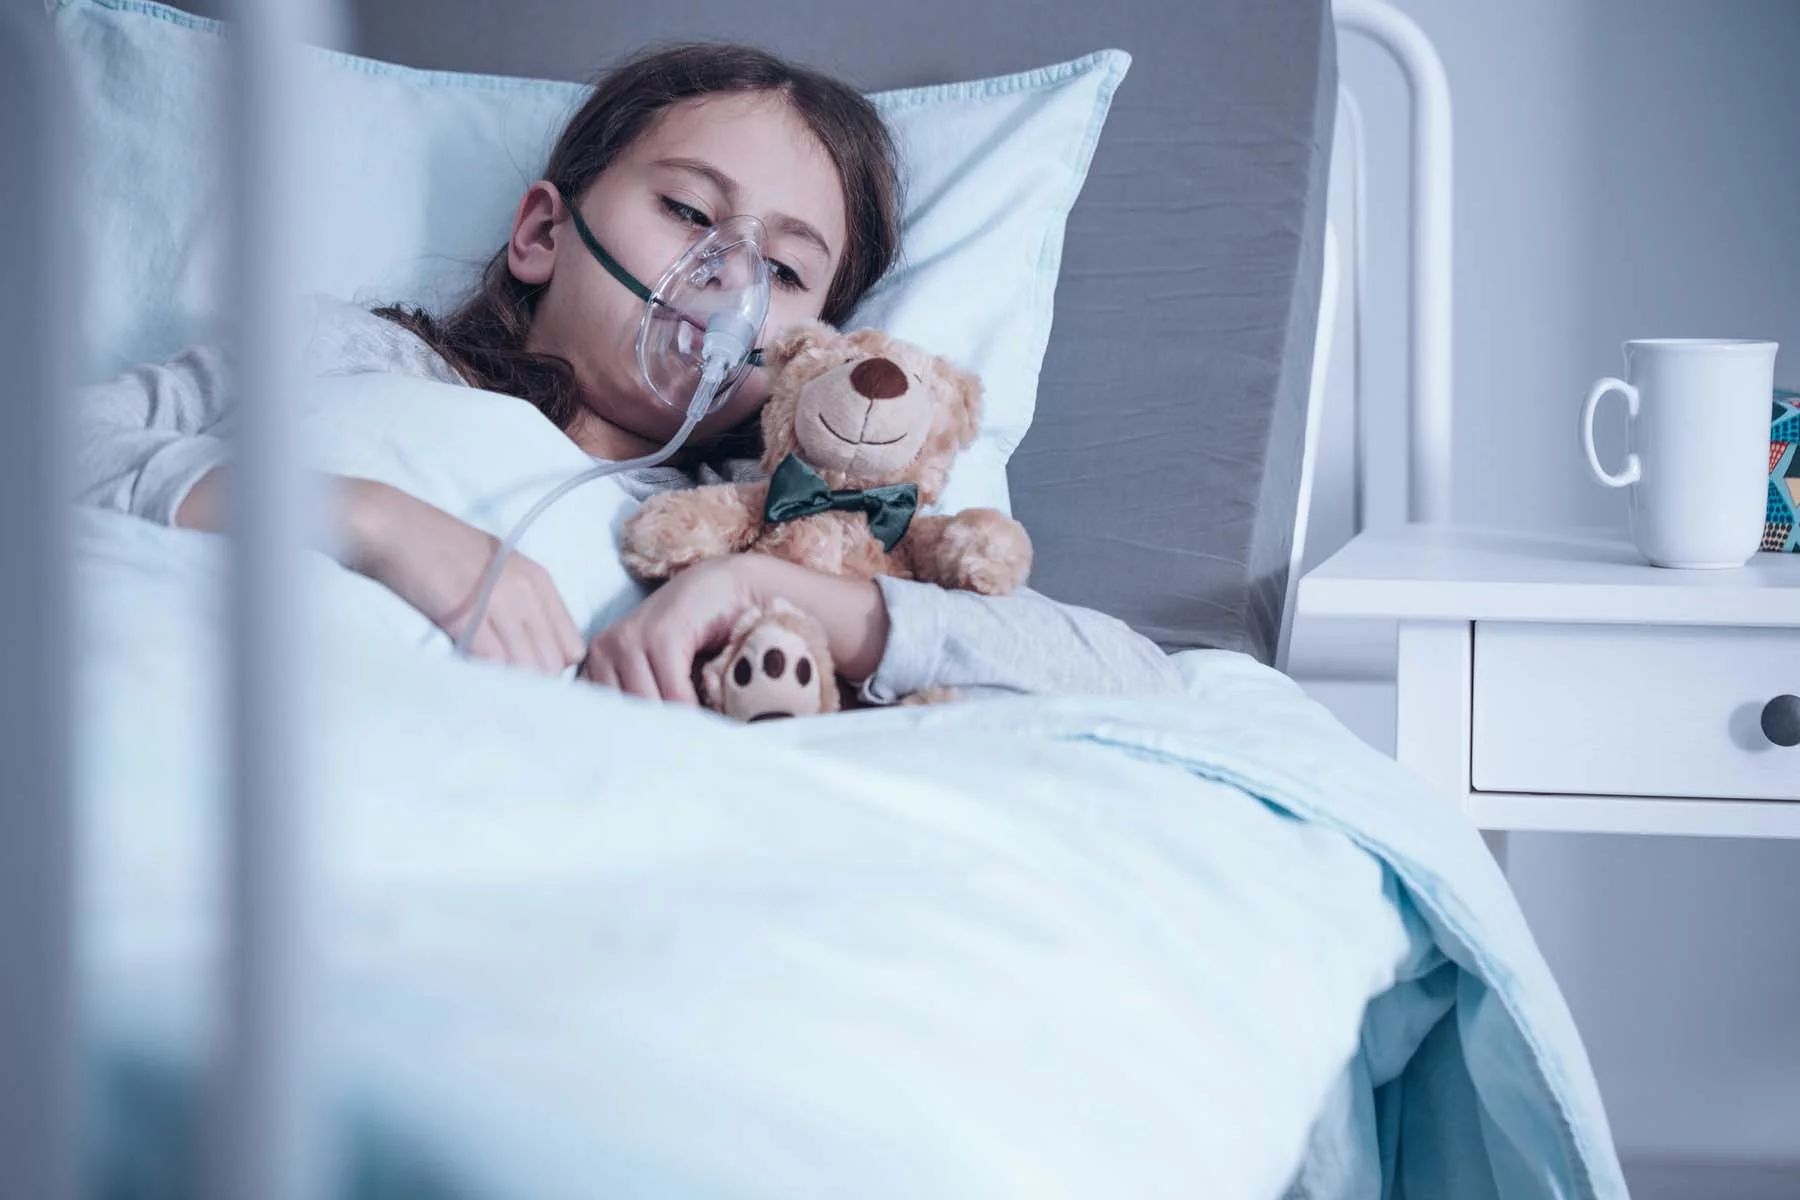 child sick in hospital bed with teddy bear